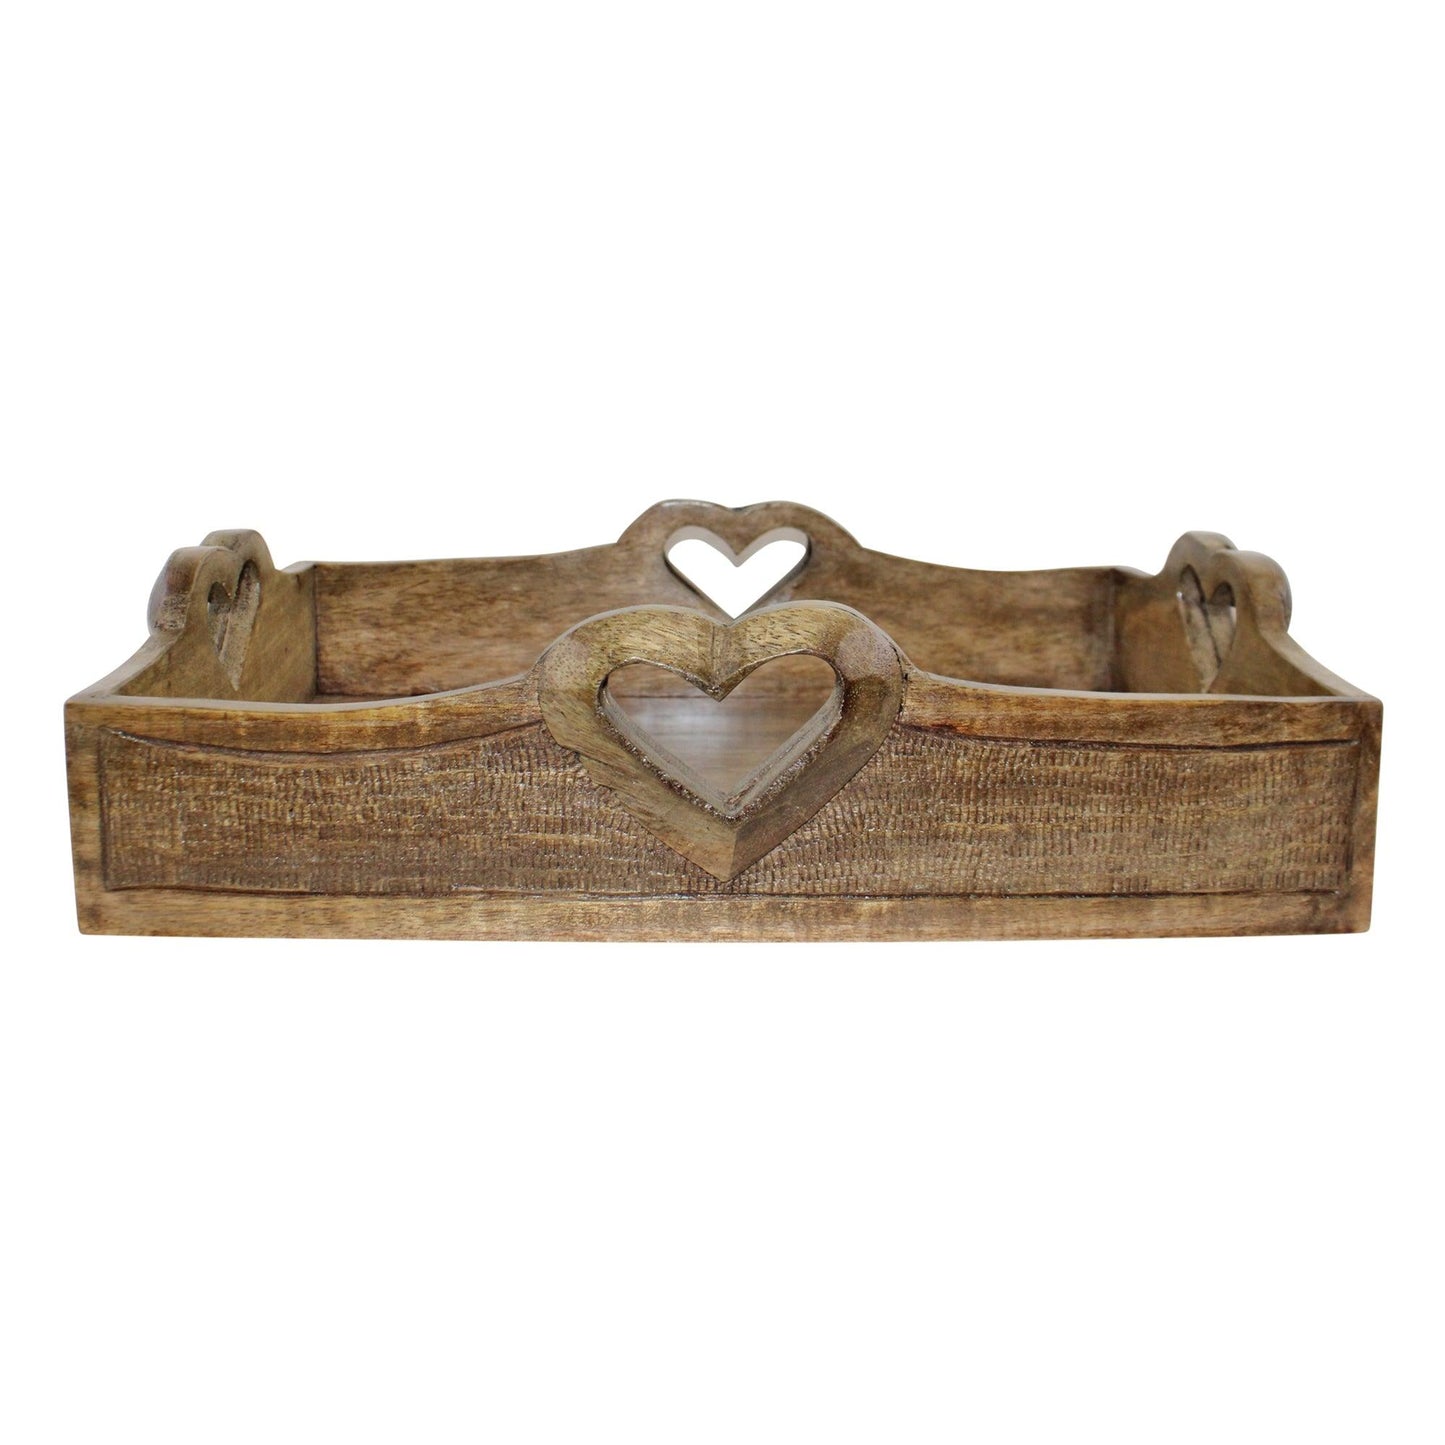 Set of 2 Rustic Wooden Heart Detail Serving Trays with Handles Side View